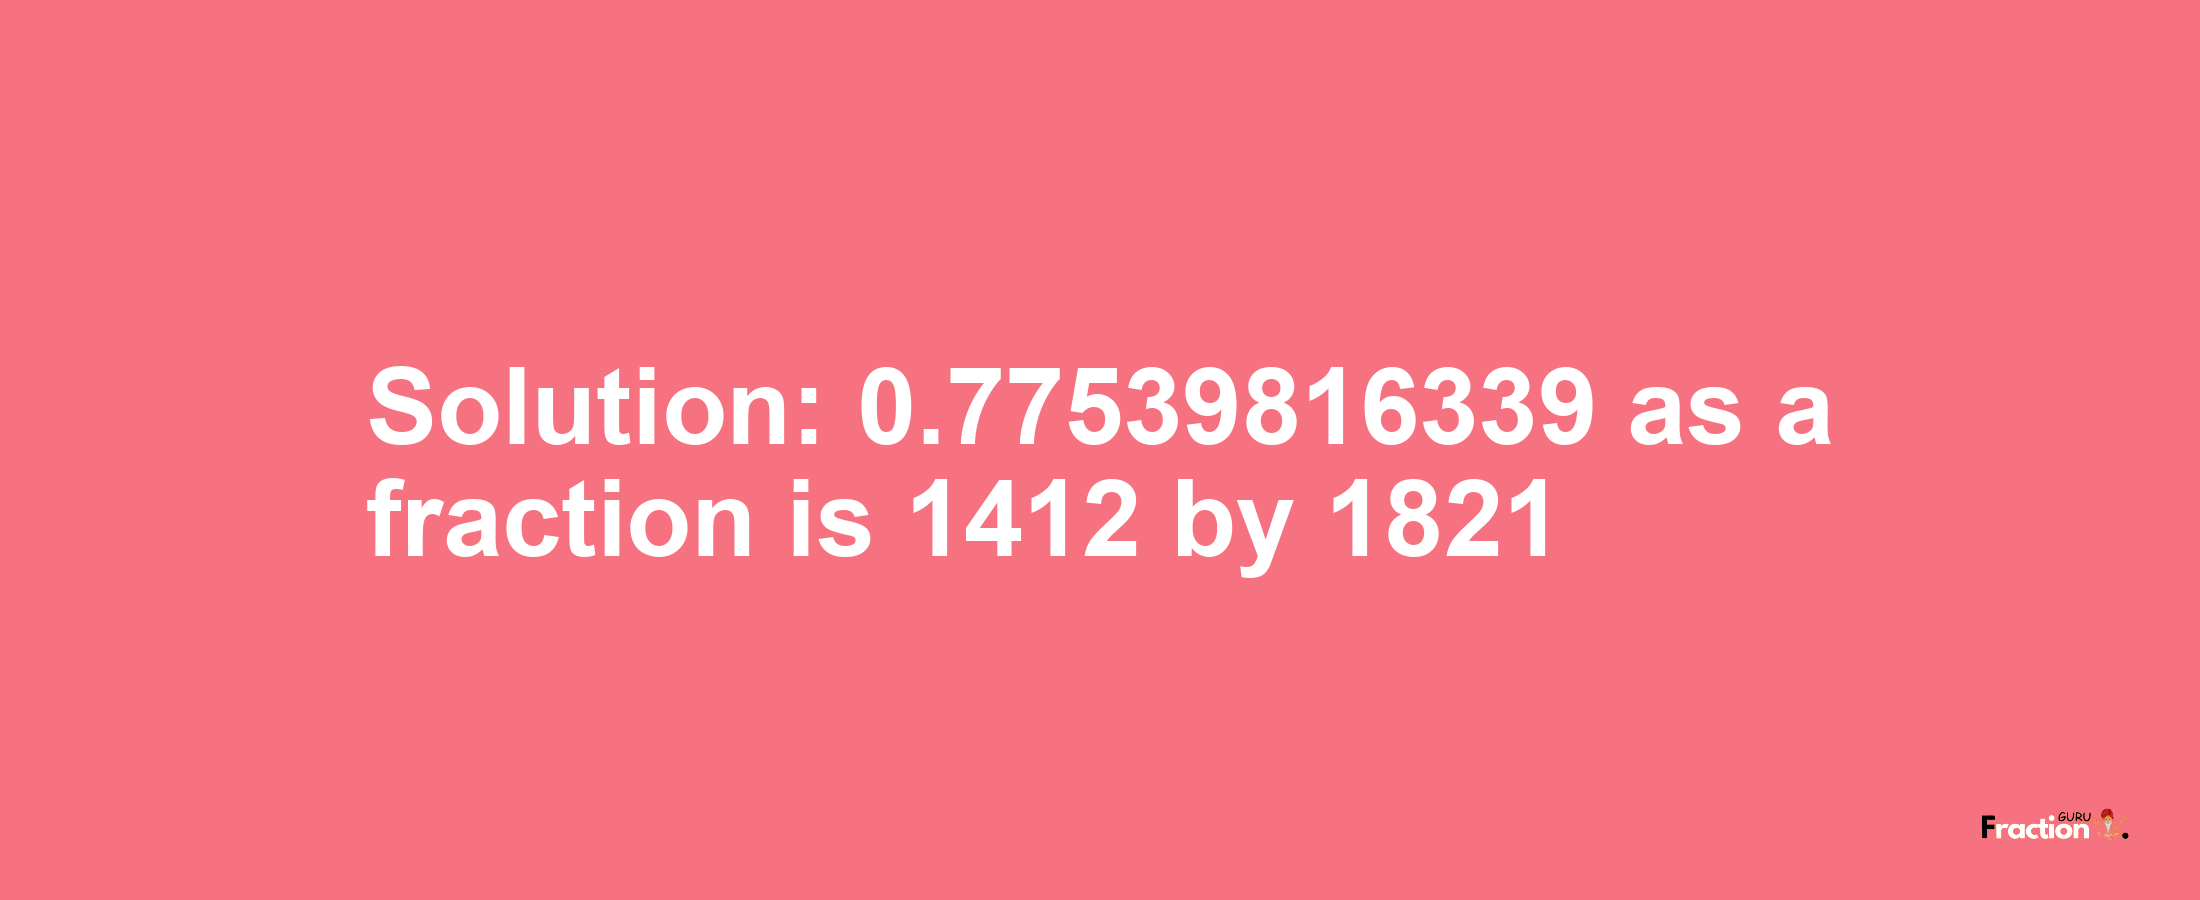 Solution:0.77539816339 as a fraction is 1412/1821